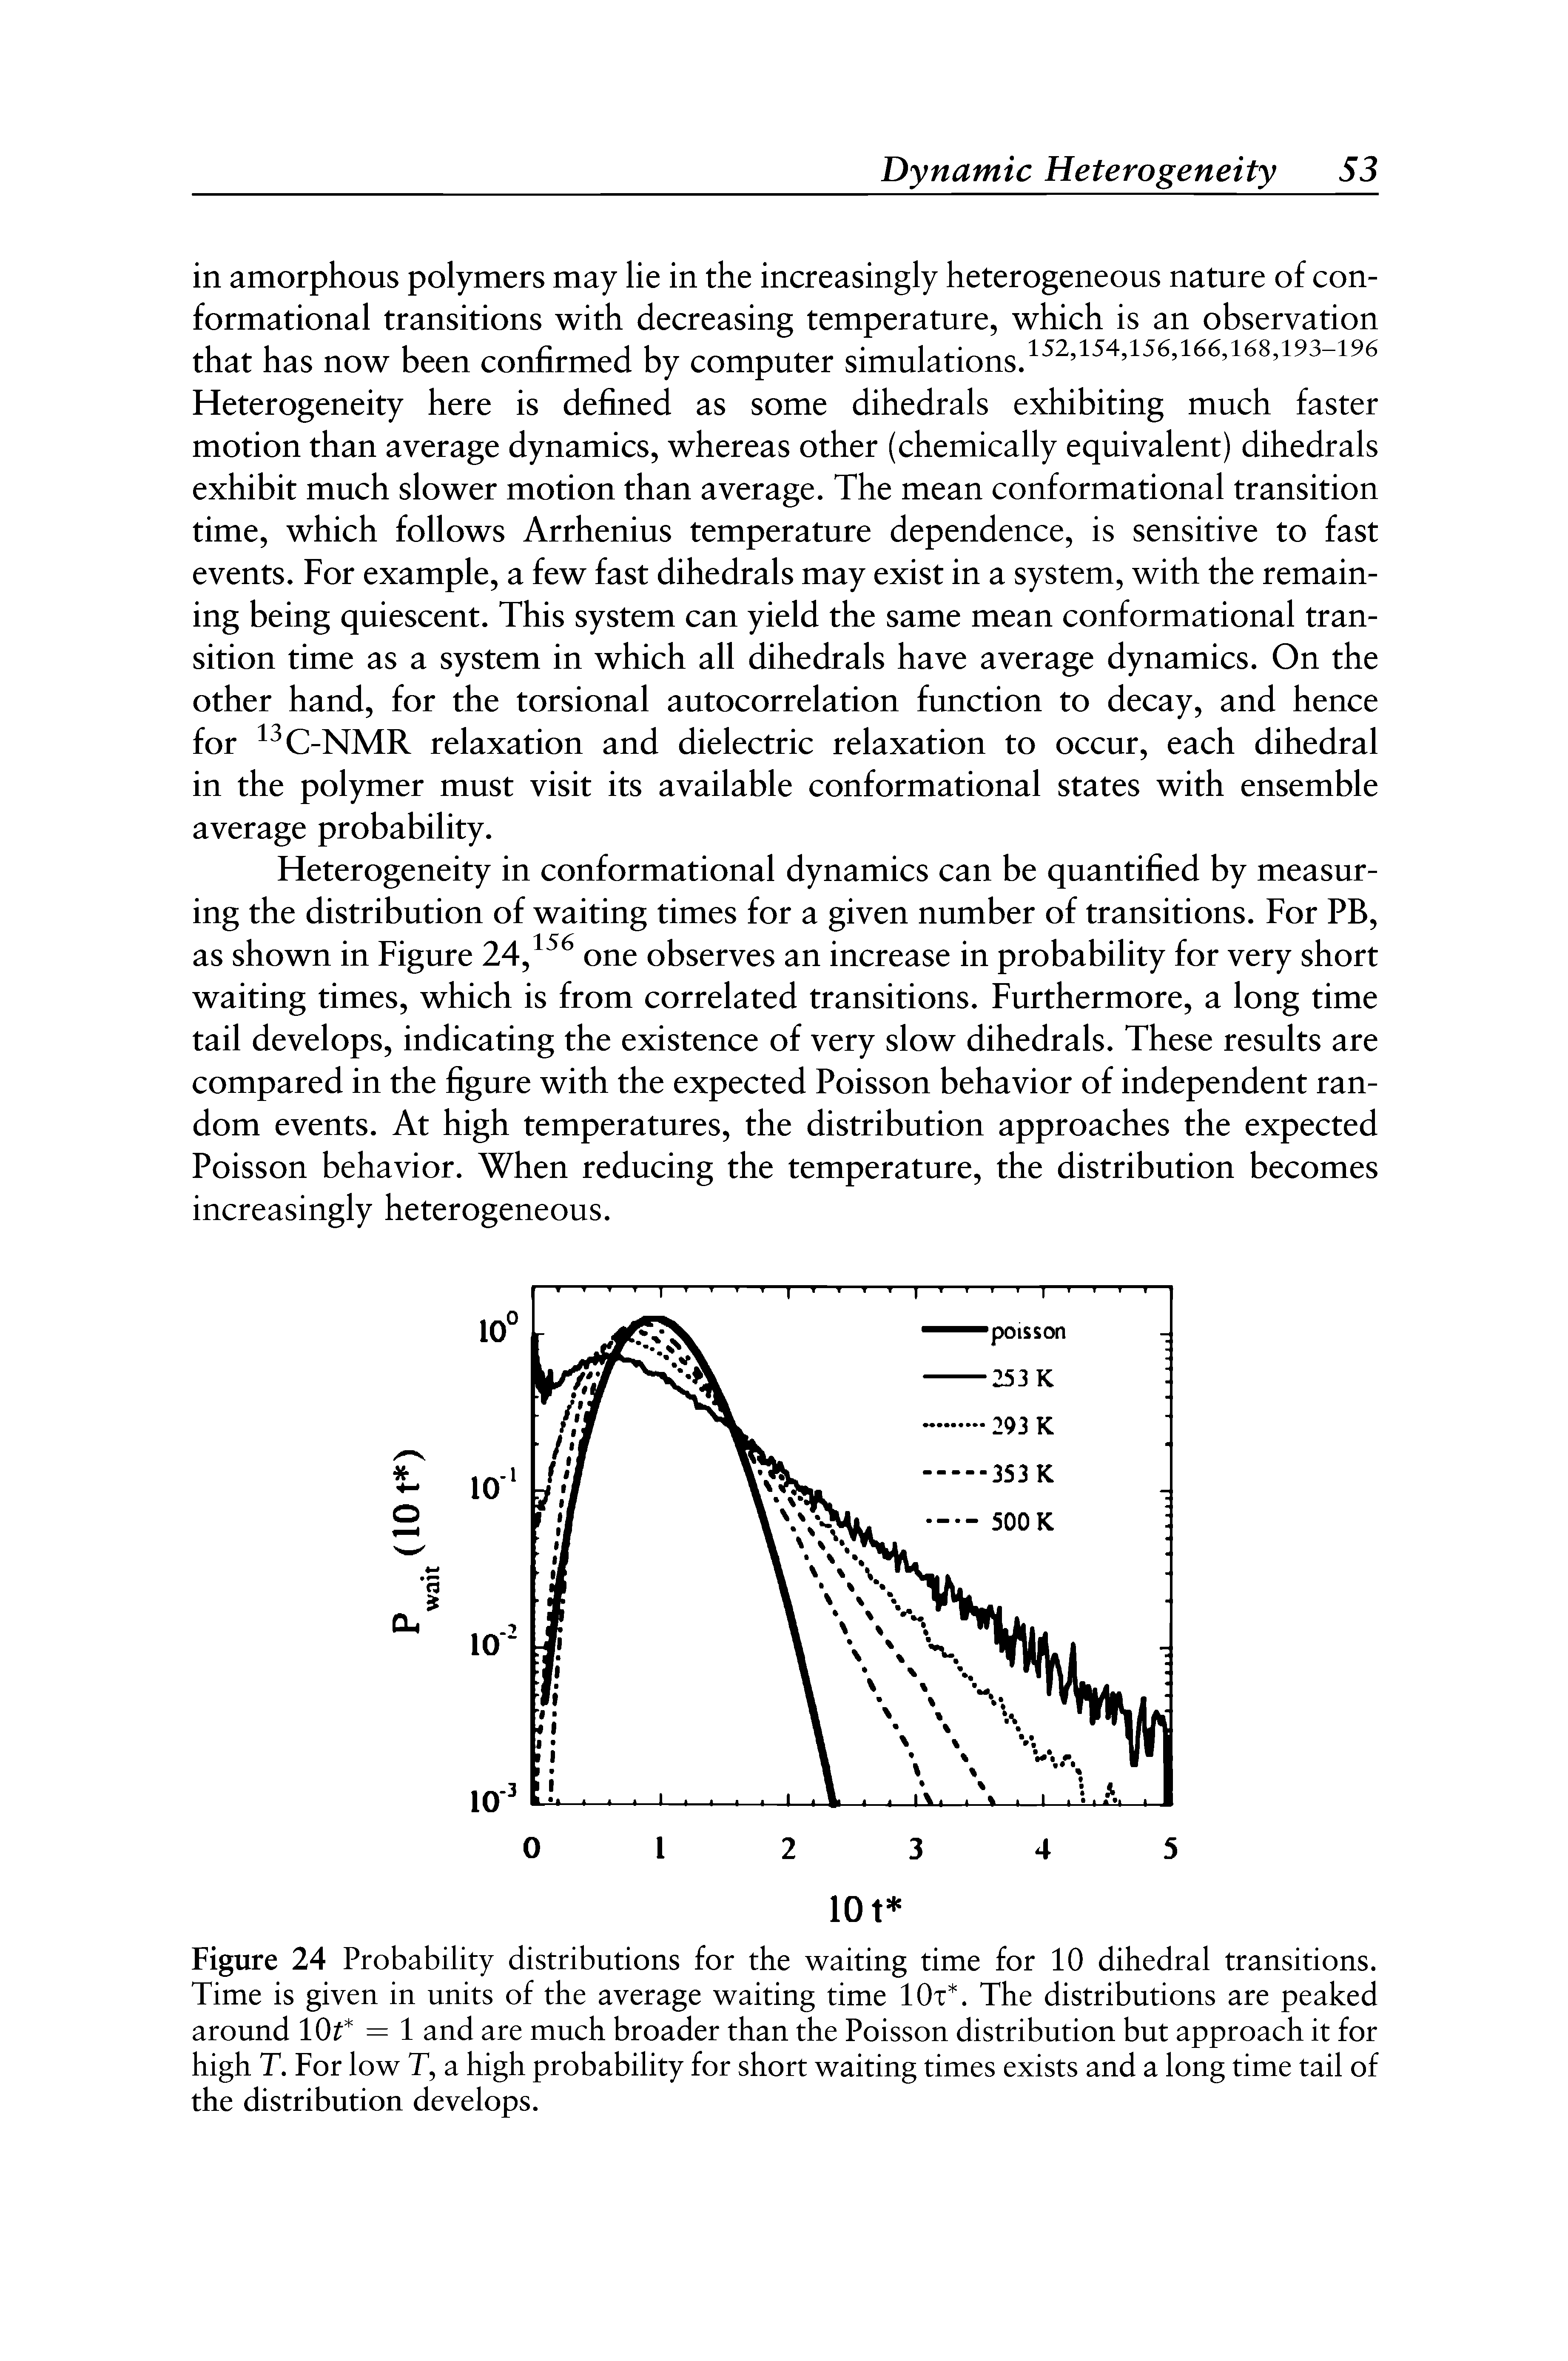 Figure 24 Probability distributions for the waiting time for 10 dihedral transitions. Time is given in units of the average waiting time 10x. The distributions are peaked around 10 = 1 and are much broader than the Poisson distribution but approach it for high T. For low T, a high probability for short waiting times exists and a long time tail of the distribution develops.